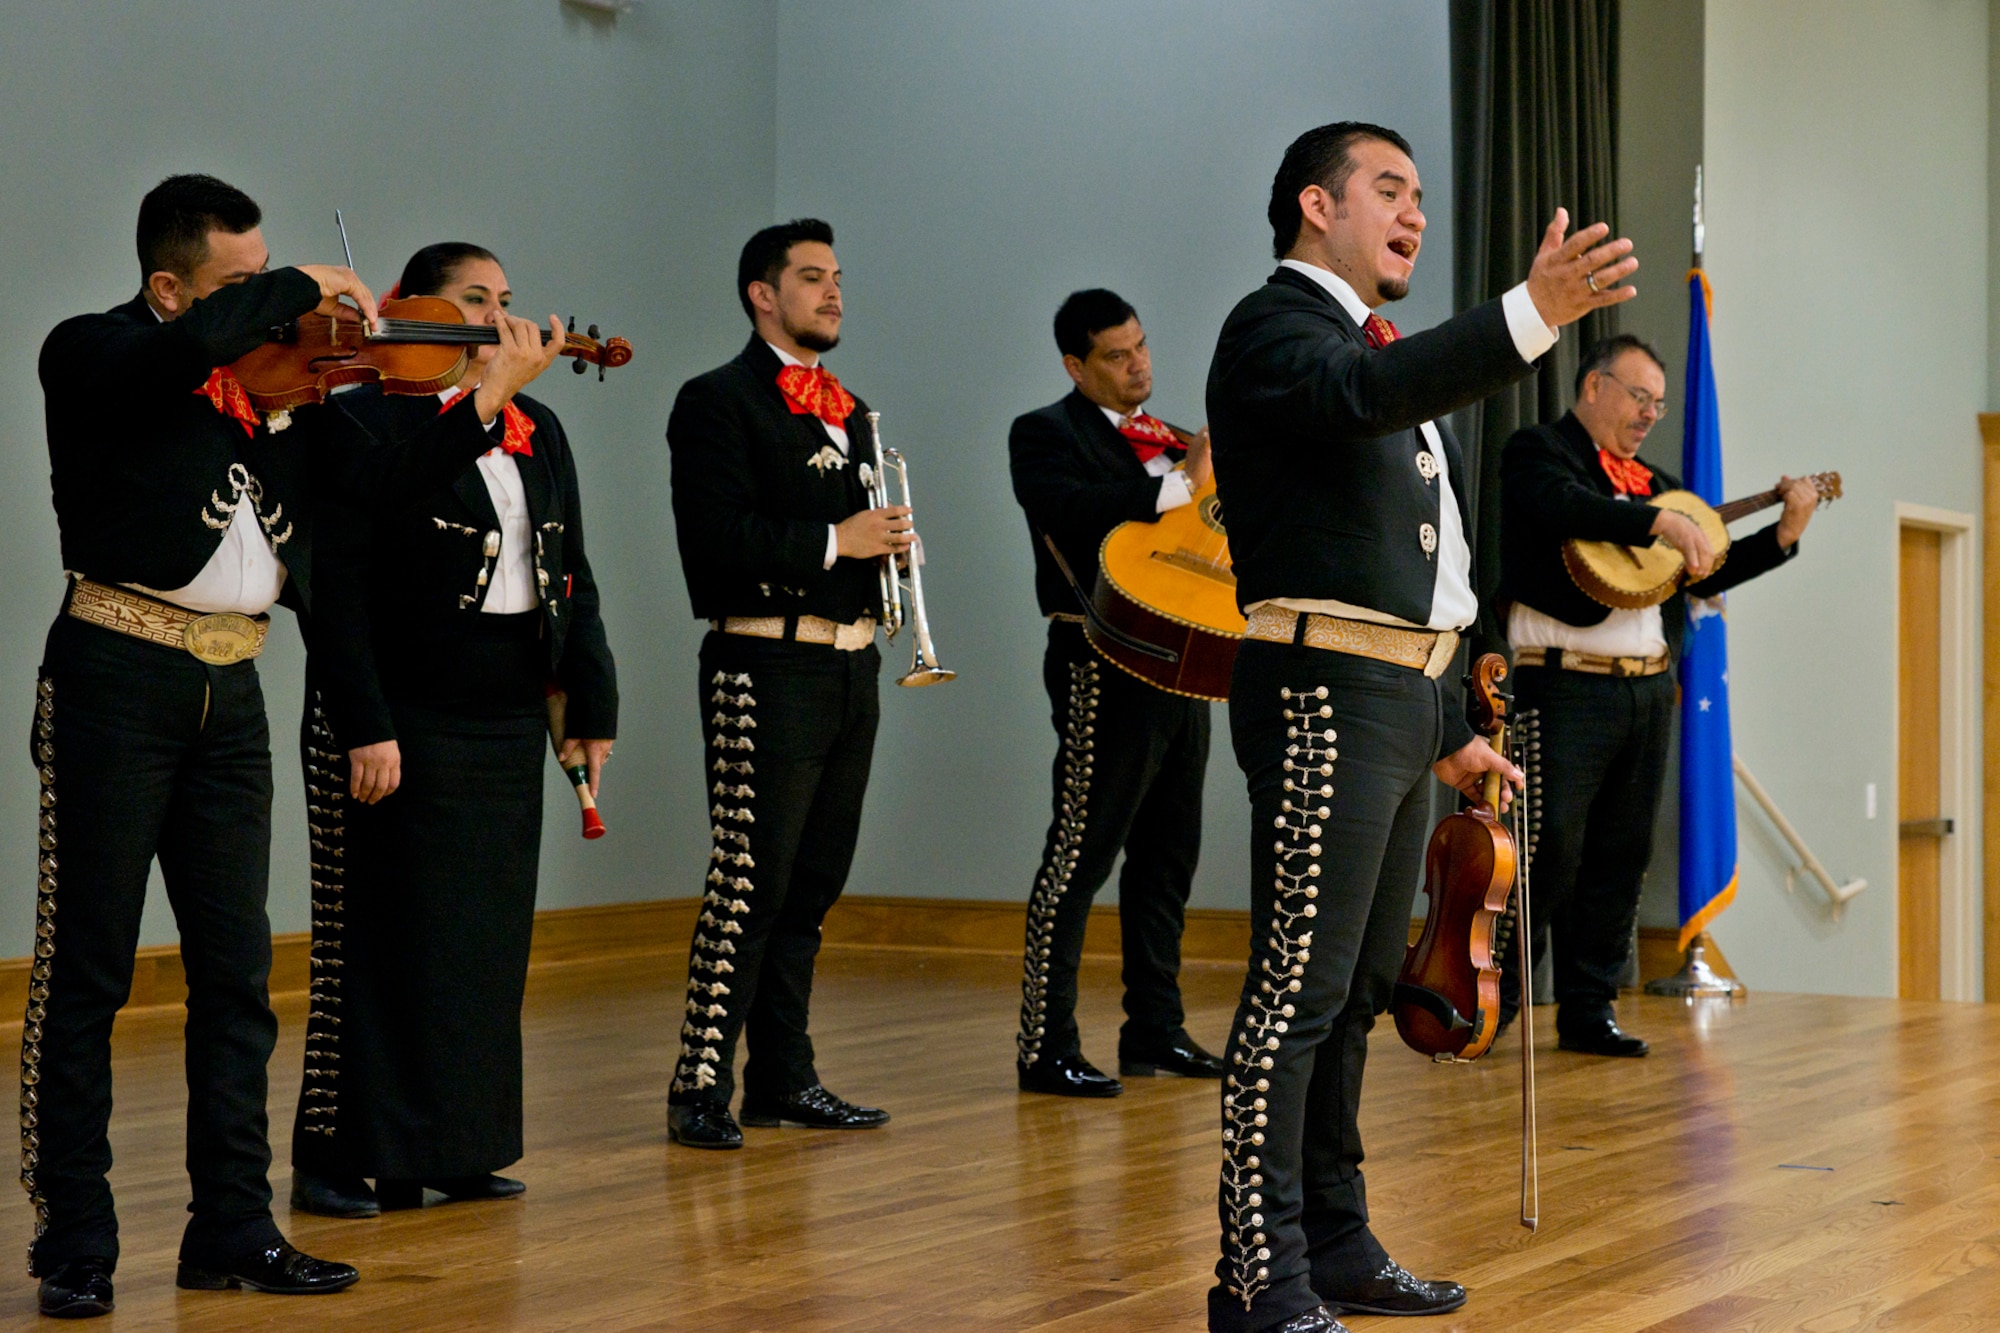 Members of Mariachi Viva Jalisco, perform folk music from Mexico during the Team Little Rock Diversity Day 2016 celebration at the Walter Community Support Center at Little Rock Air Force Base, Ark., Jan. 15, 2016. The Diversity Day event was held to celebrate the life, history, and culture of the nation’s Servicemen and women, and offered those who attended an opportunity to discuss diversity, see cultural performances and taste food from around the world. (U.S. Air Force photo by Master Sgt. Jeff Walston/Released)